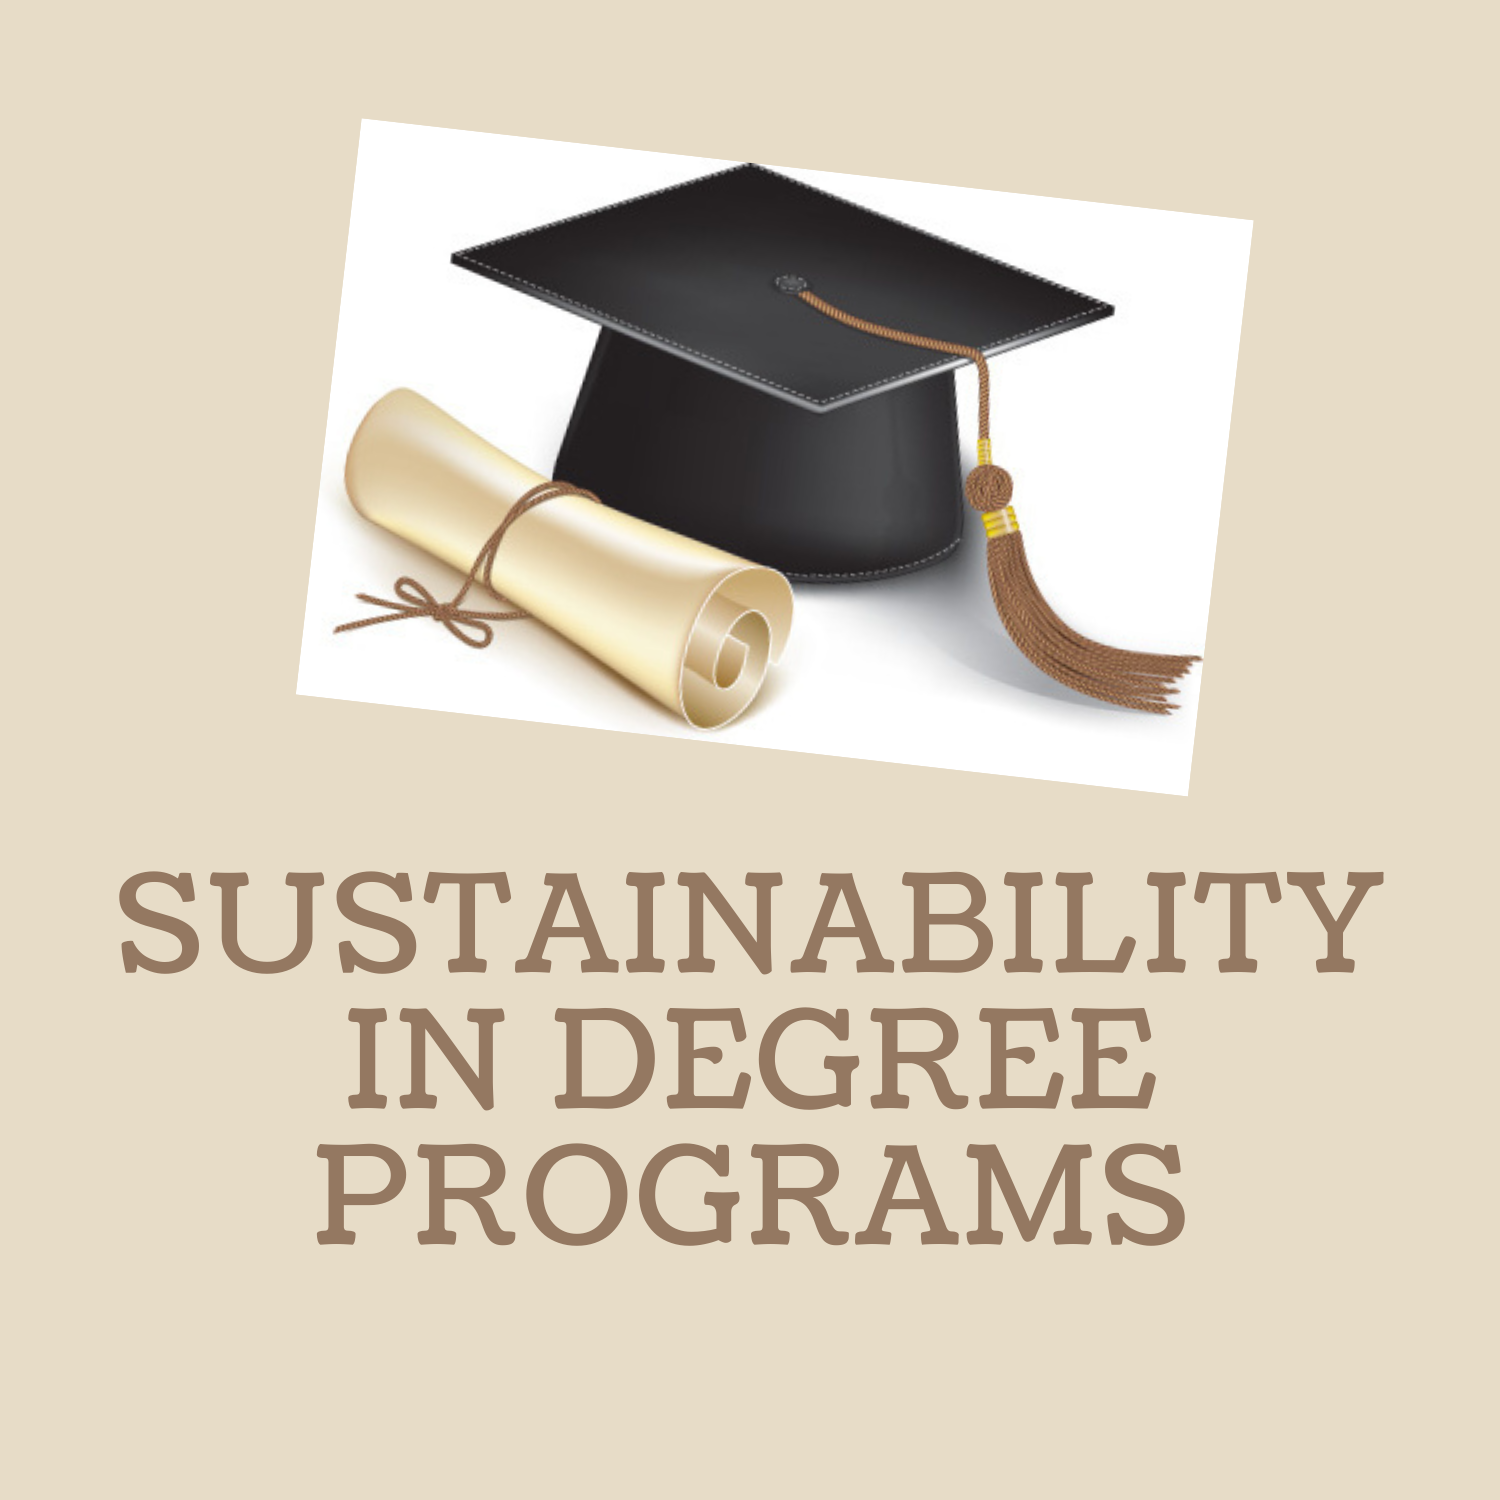 Sustainability in degree